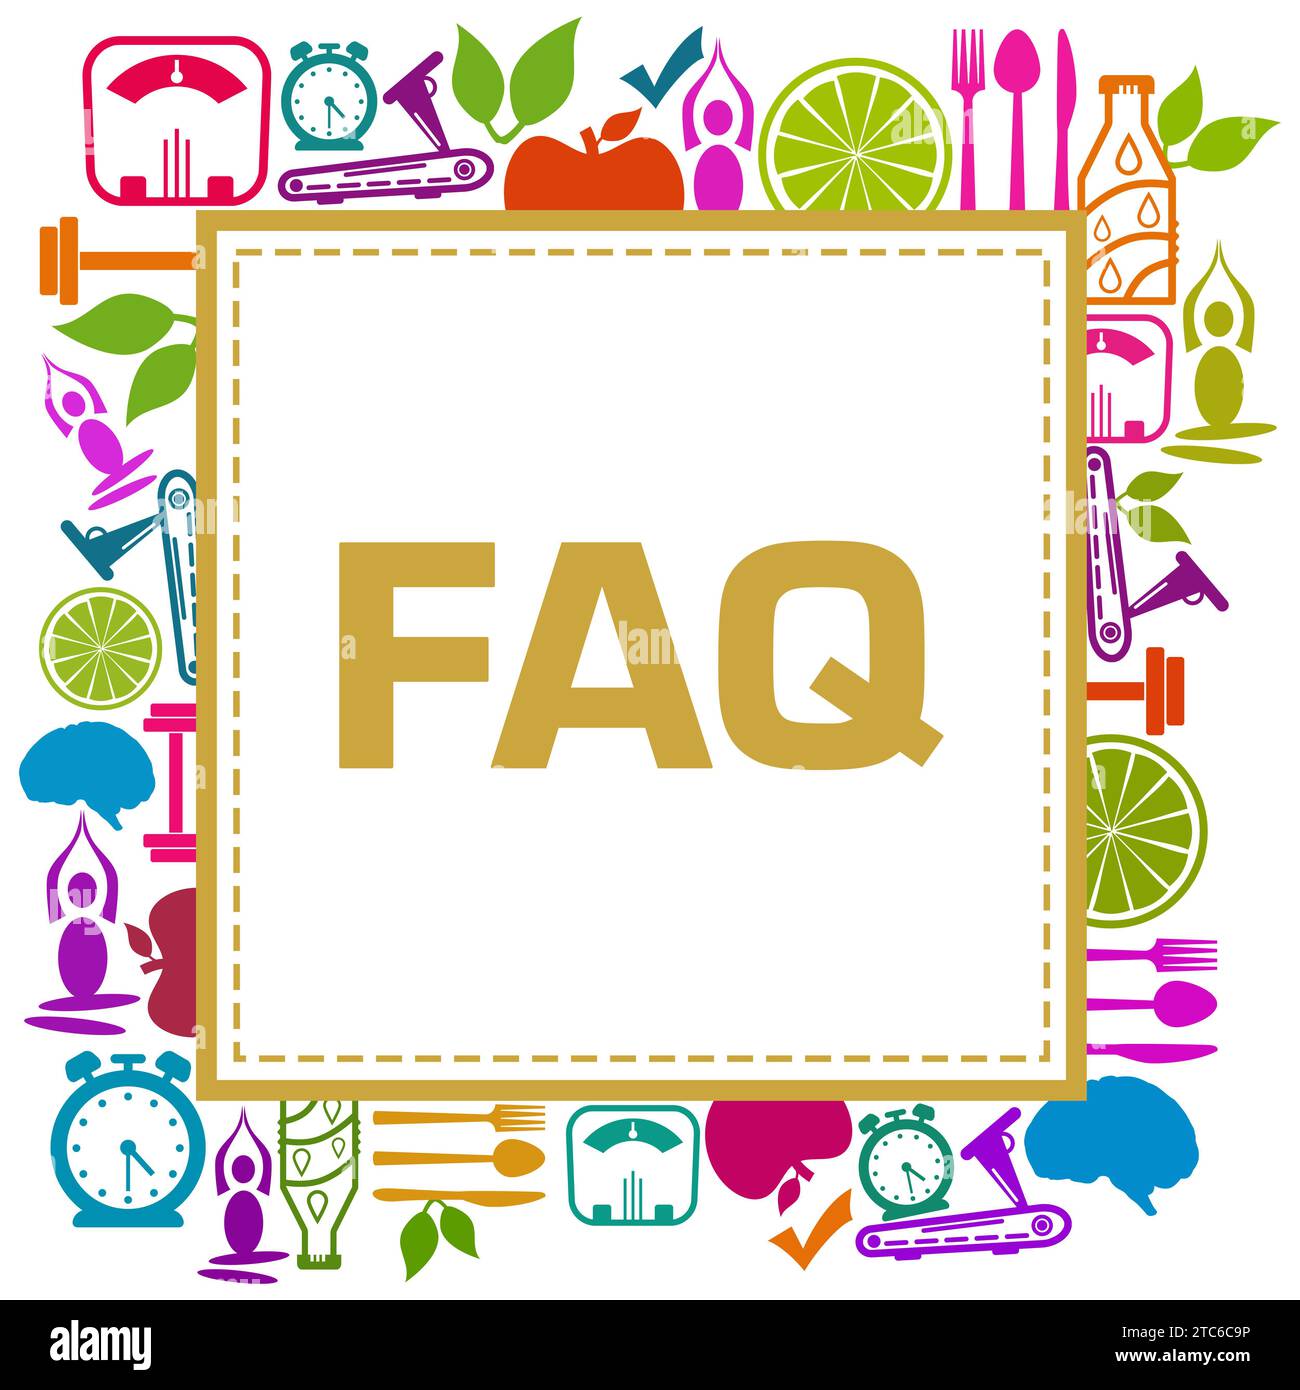 FAQ - Frequently Asked Questions Colorful Health Symbols Square Text Stock Photo